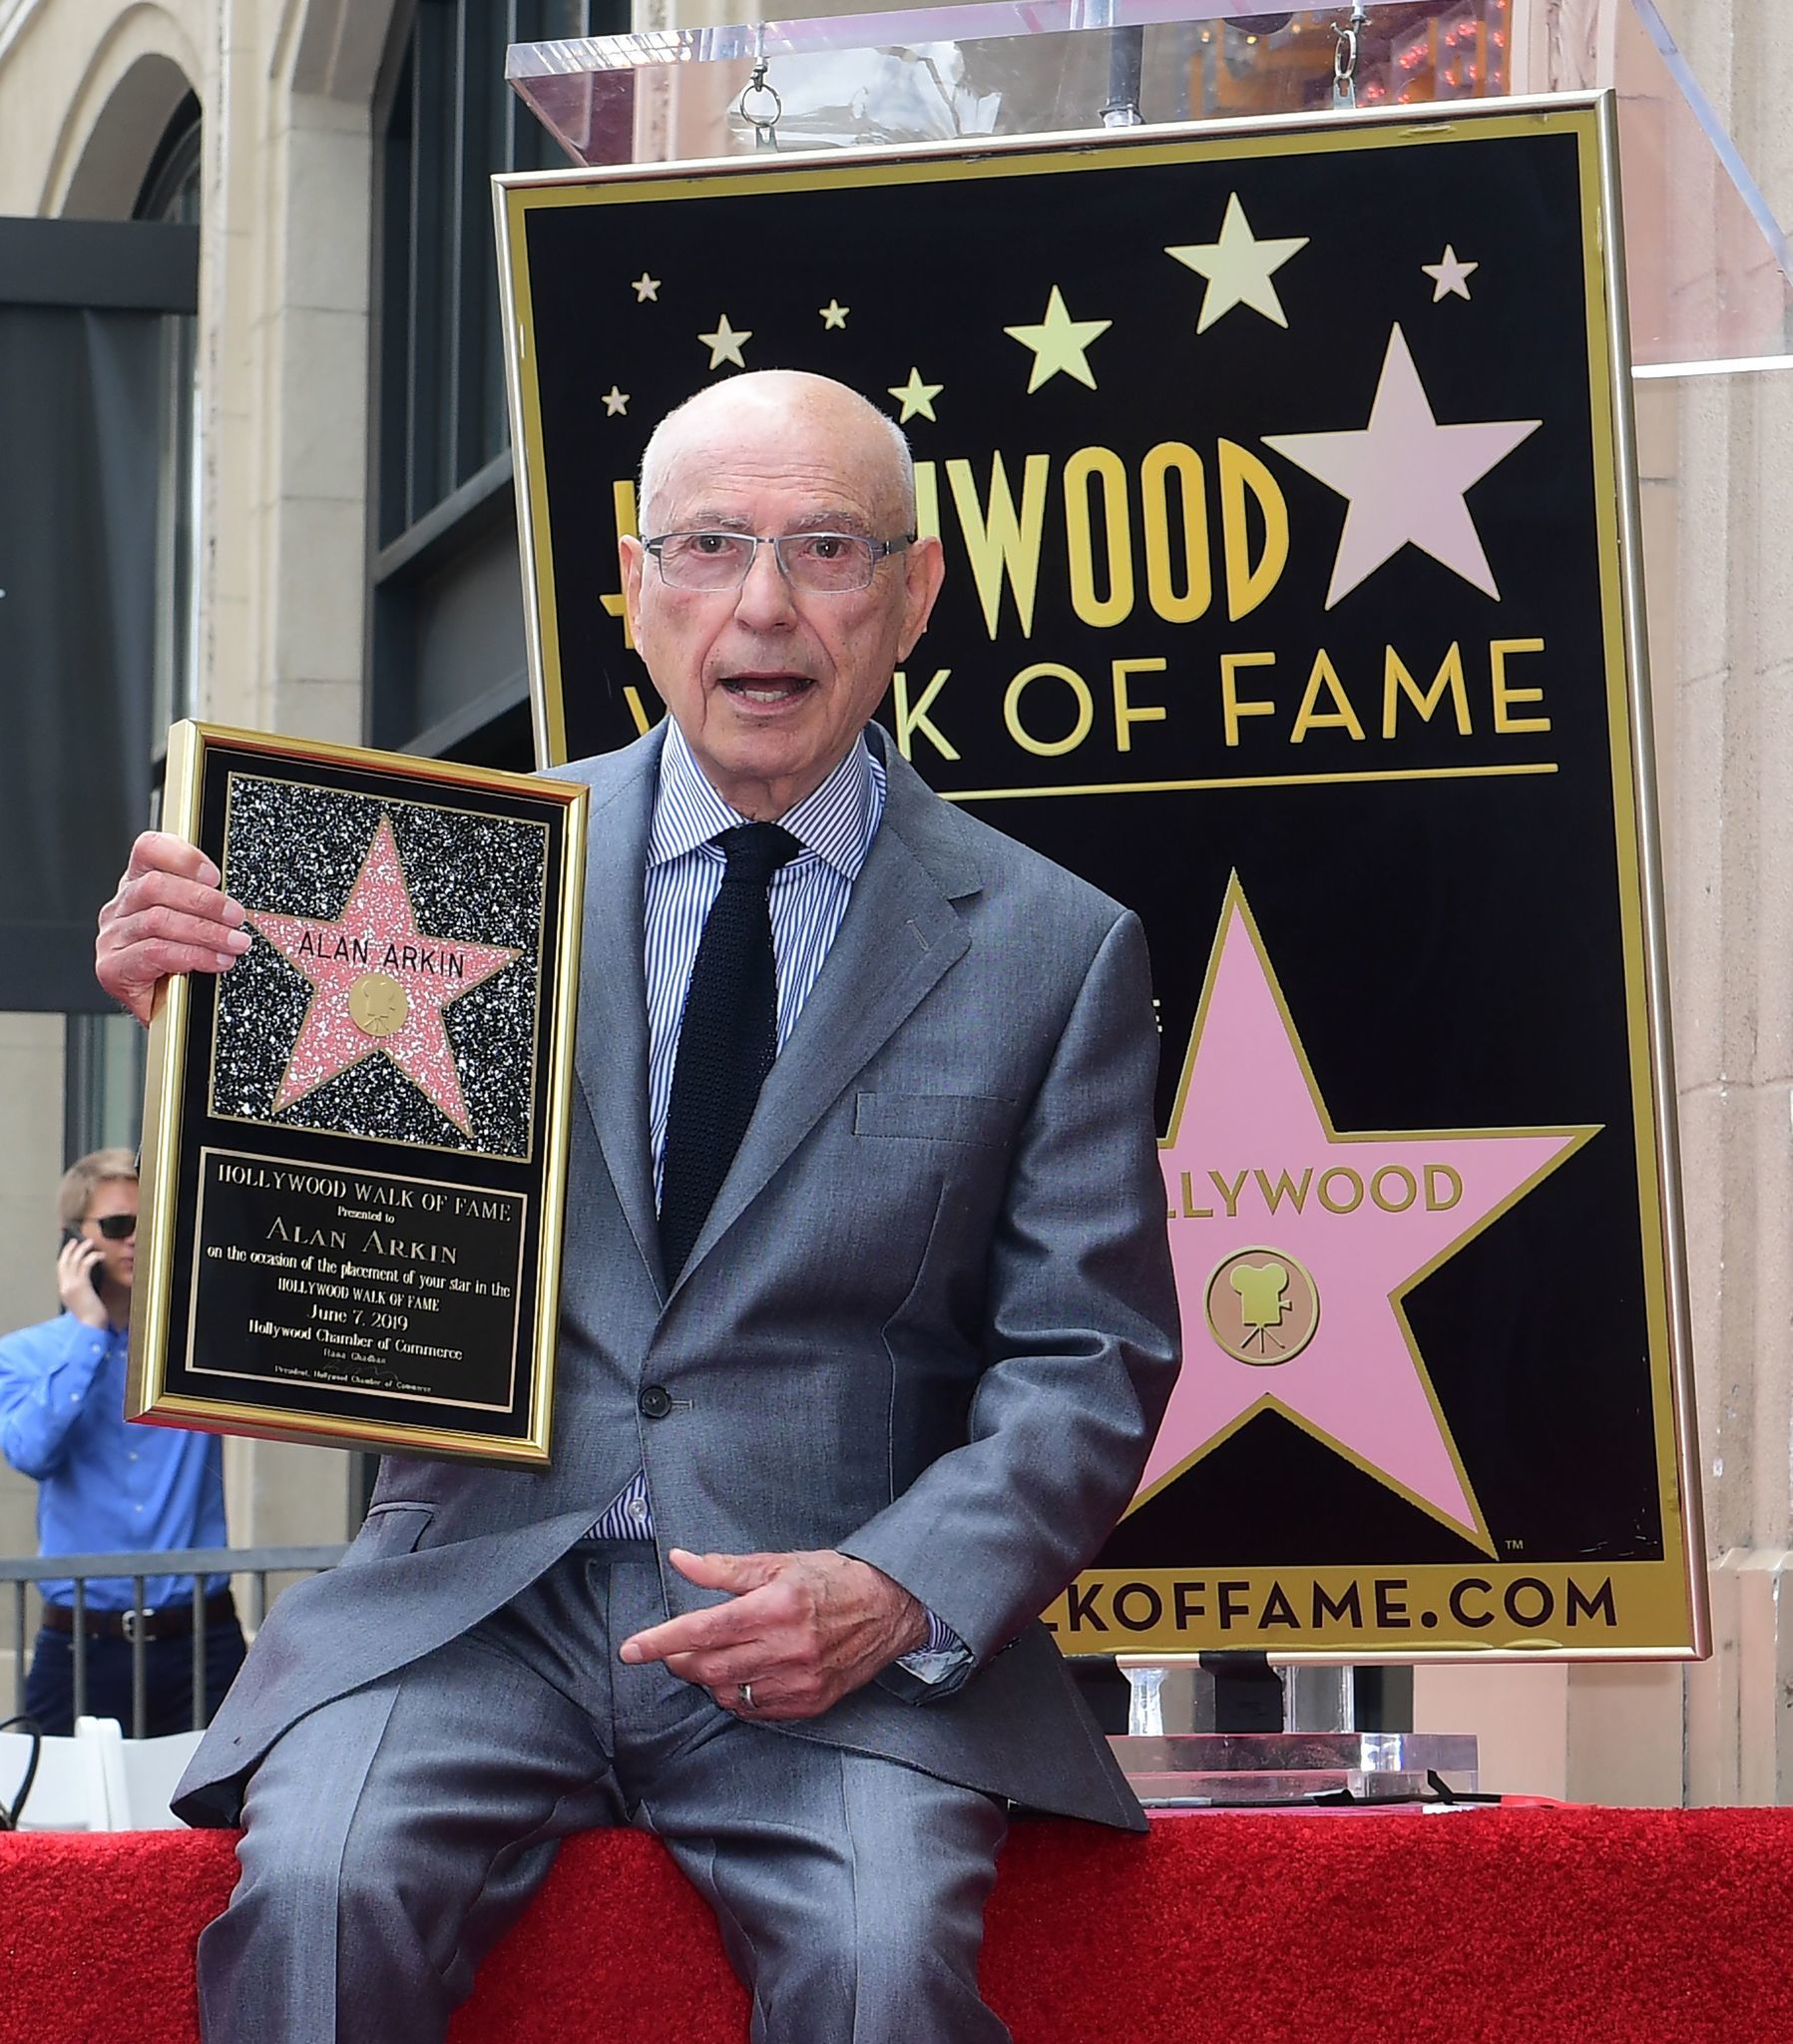 Alan Arkin poses at his Hollywood Walk of Fame Star ceremony in Hollywood on June 7, 2019.